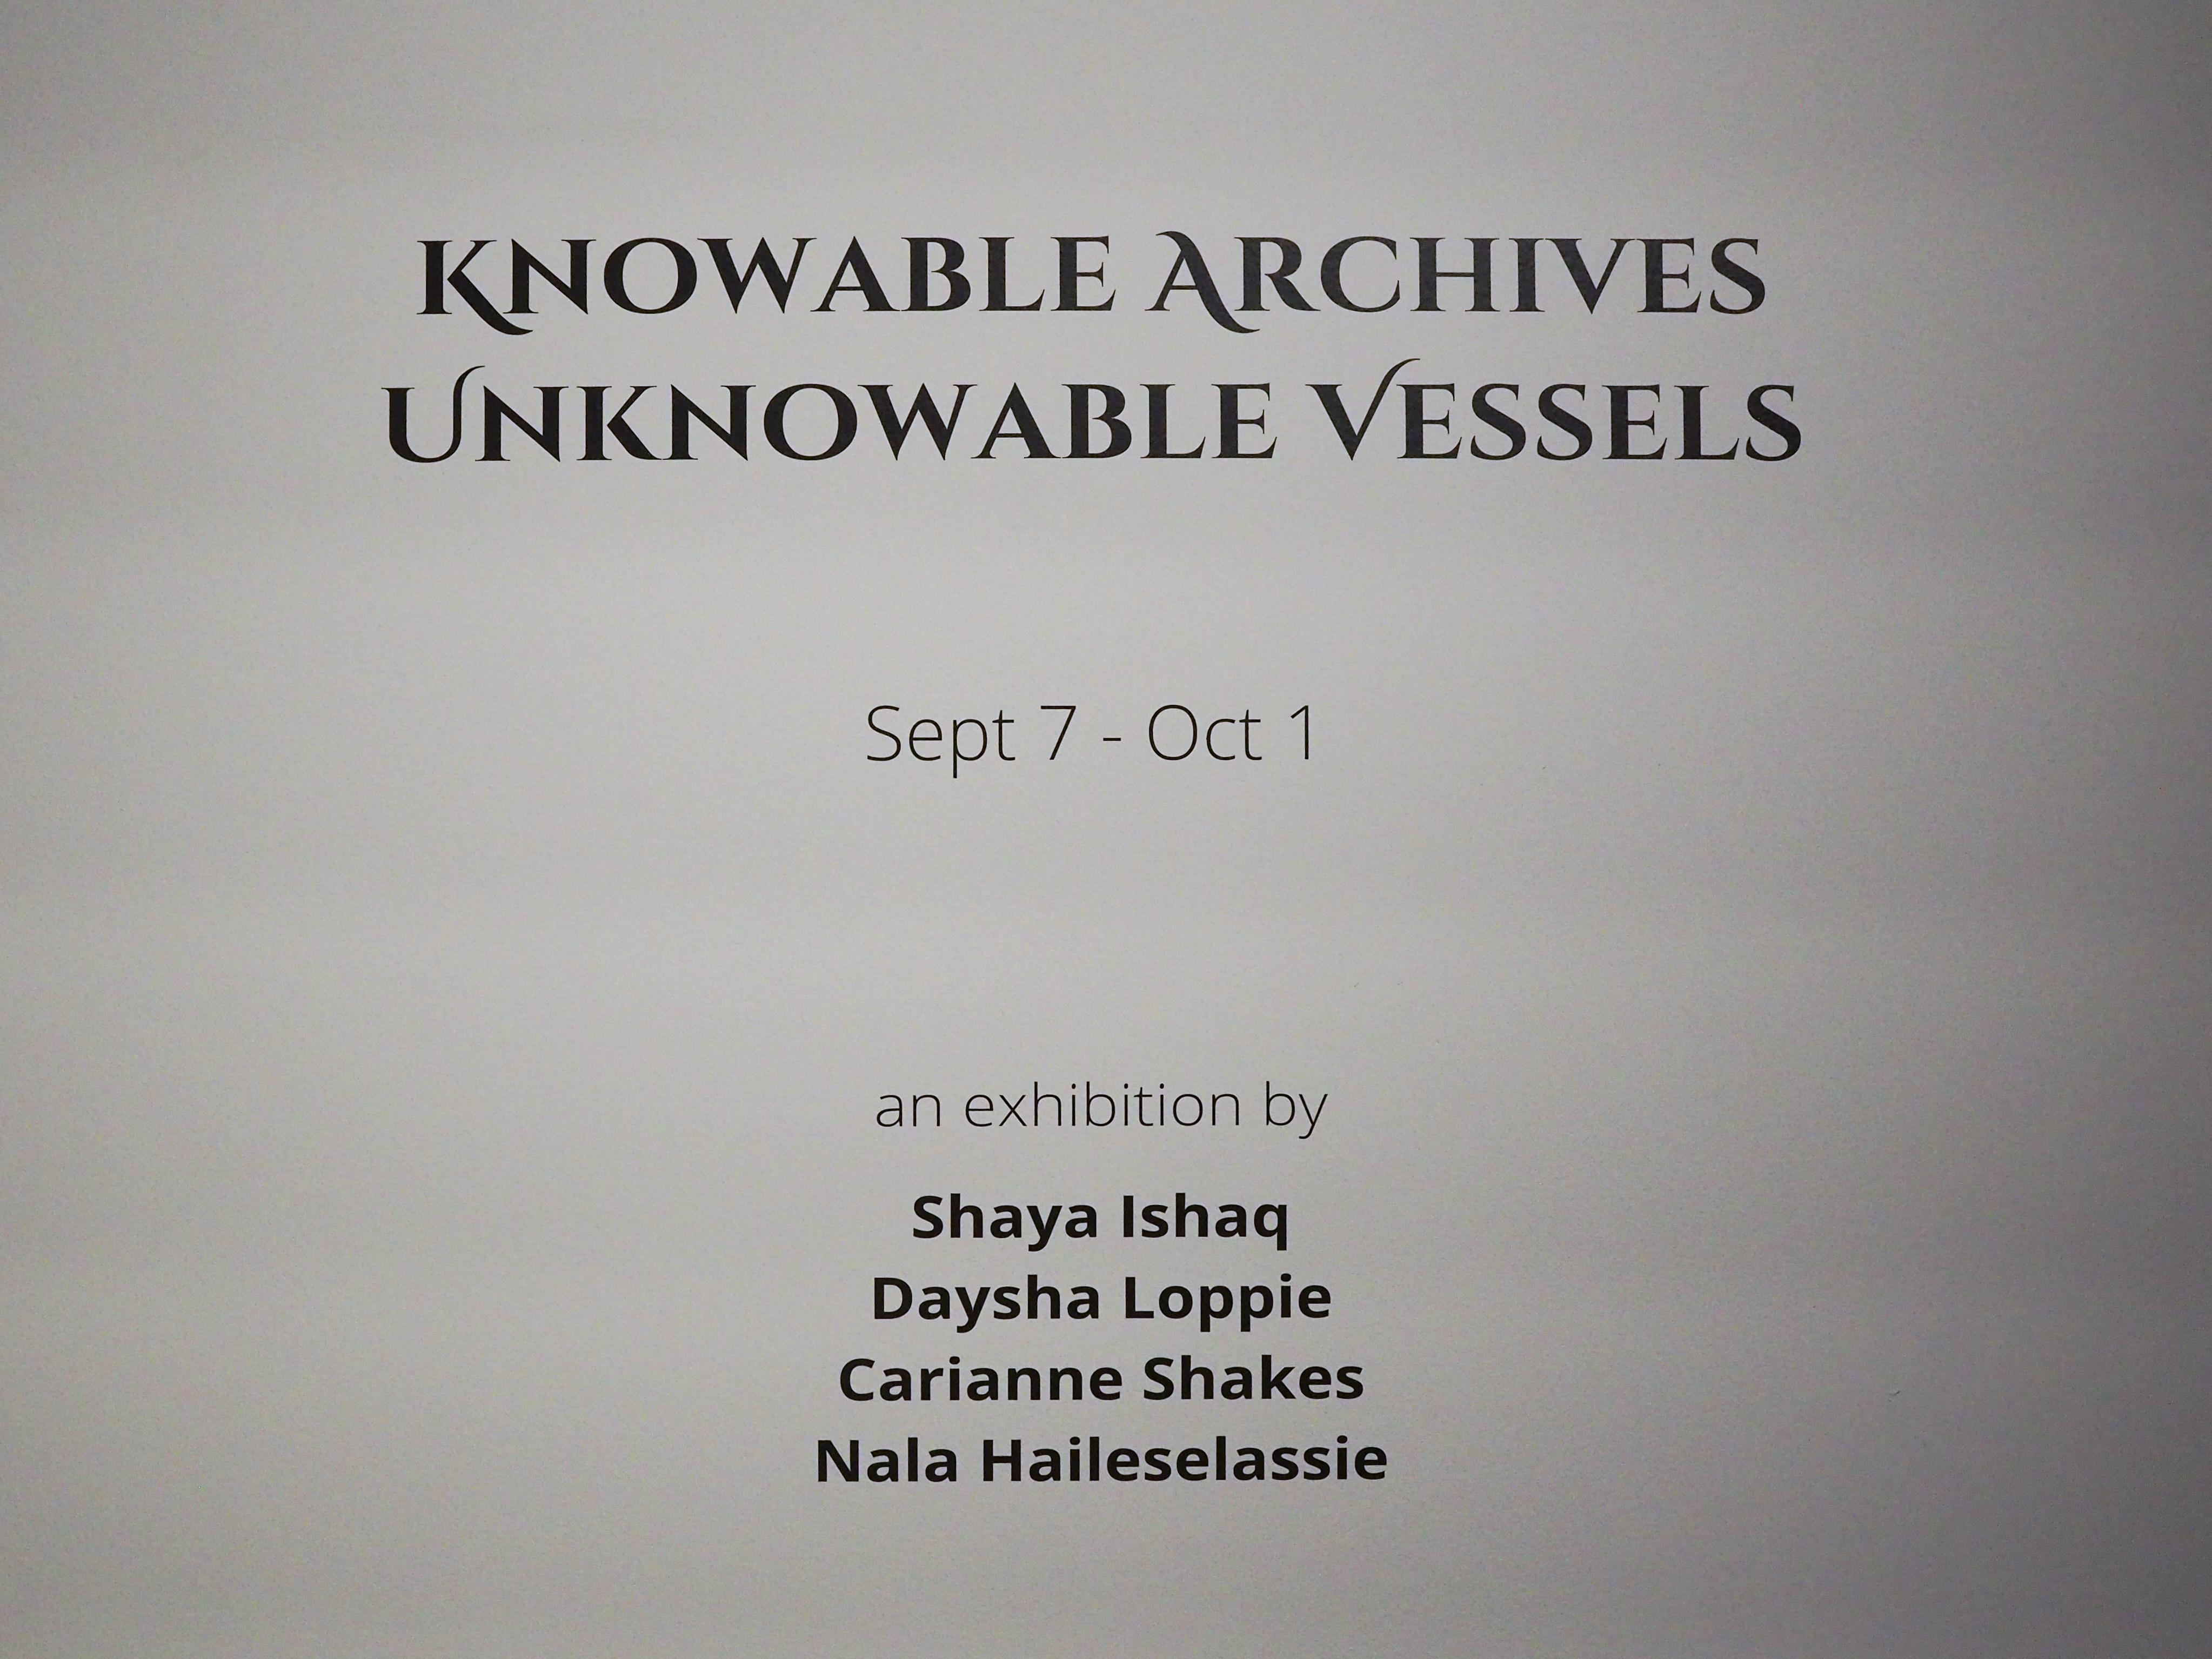 Gallery sign that reads "Knowable Archives Unknowable Vessels, an exhibition by Shaya Ishaq, Daysha Loppie, Carianne Shakes, Nala Haileselassie"